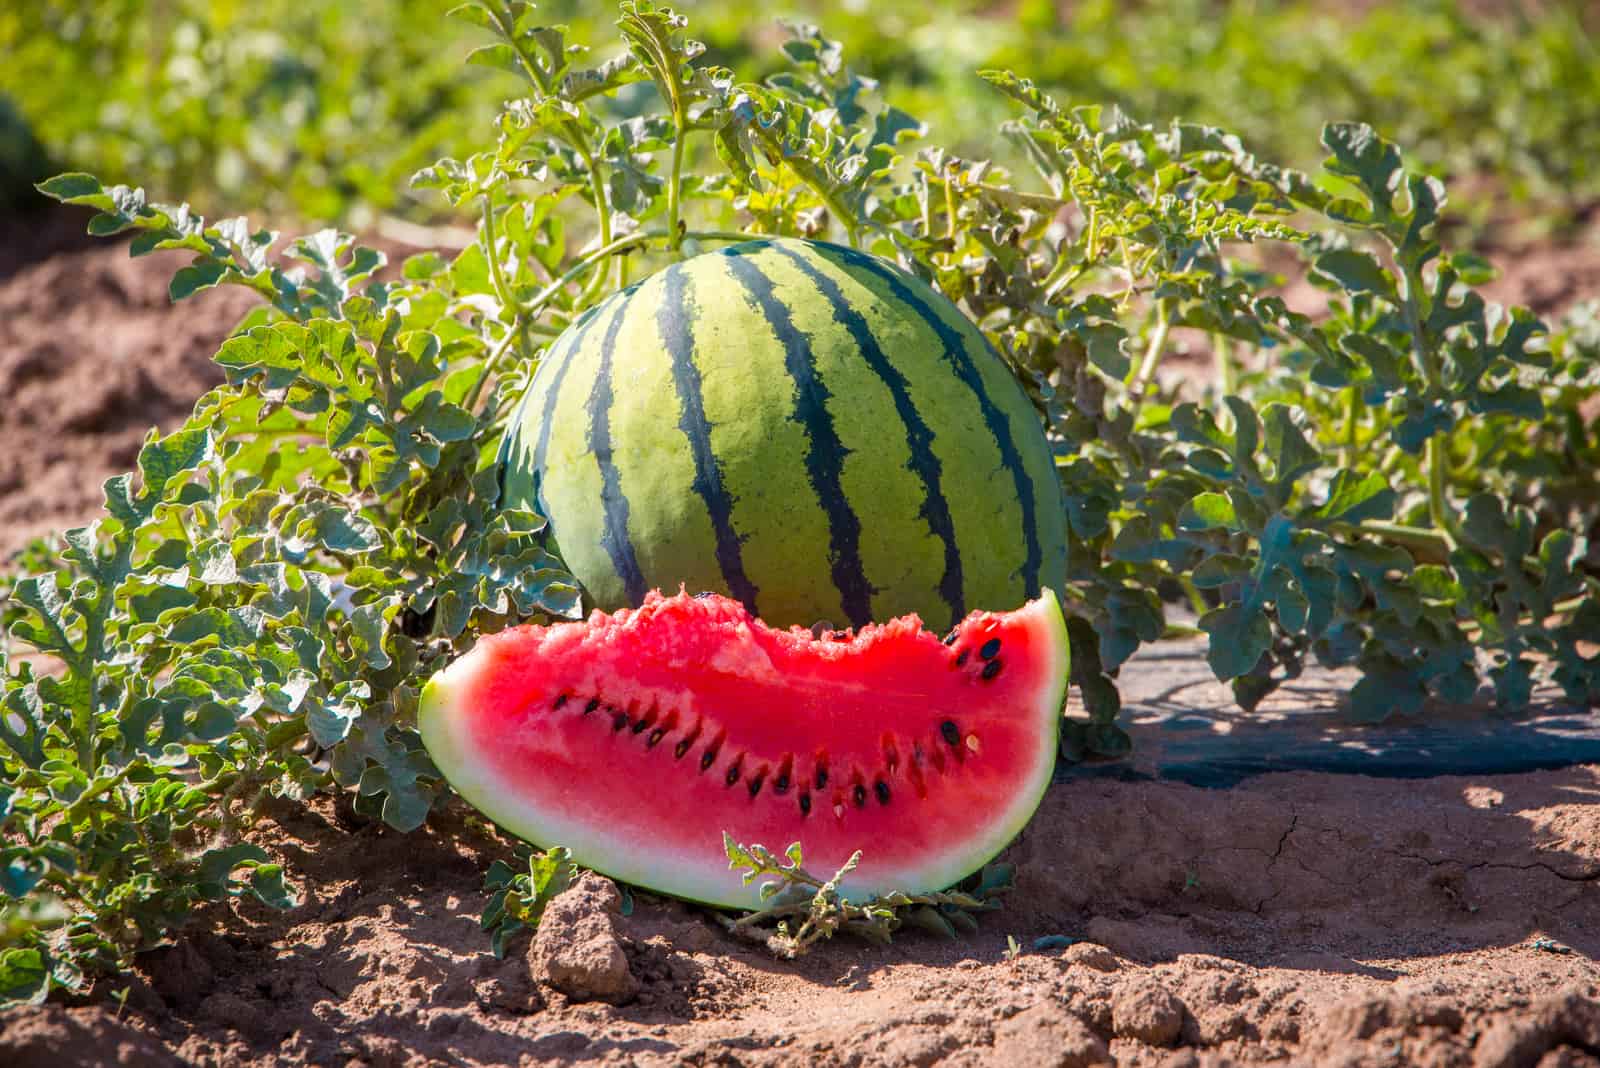 The 9 Watermelon Growing Stages: A Complete Guide